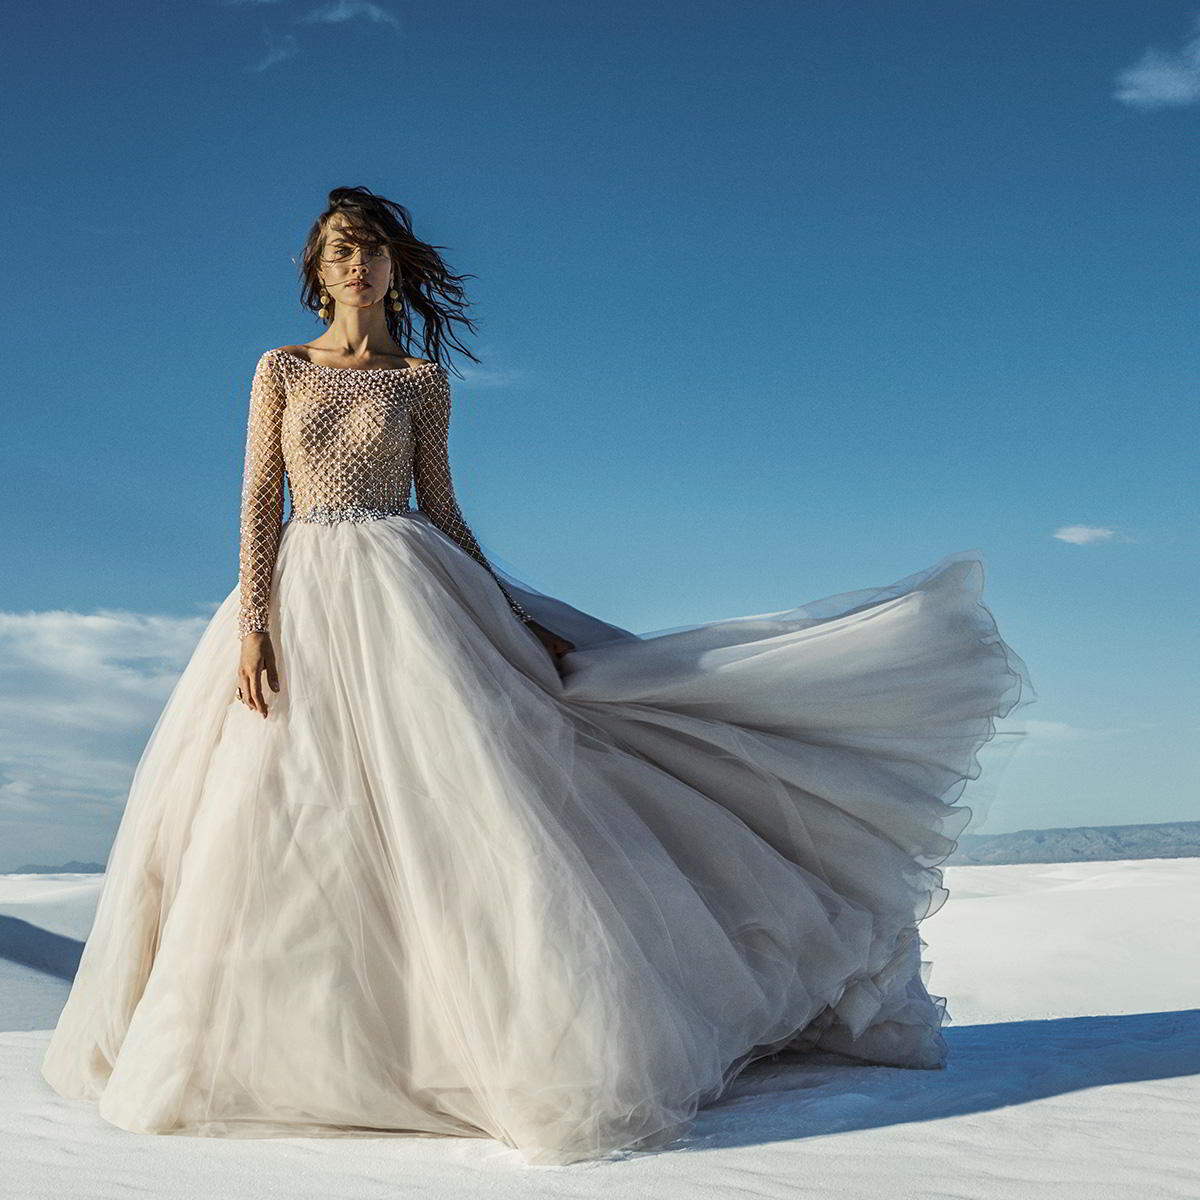 sottero and midgley s2019 bridal wedding inspirasi featured wedding gowns dresses and collection